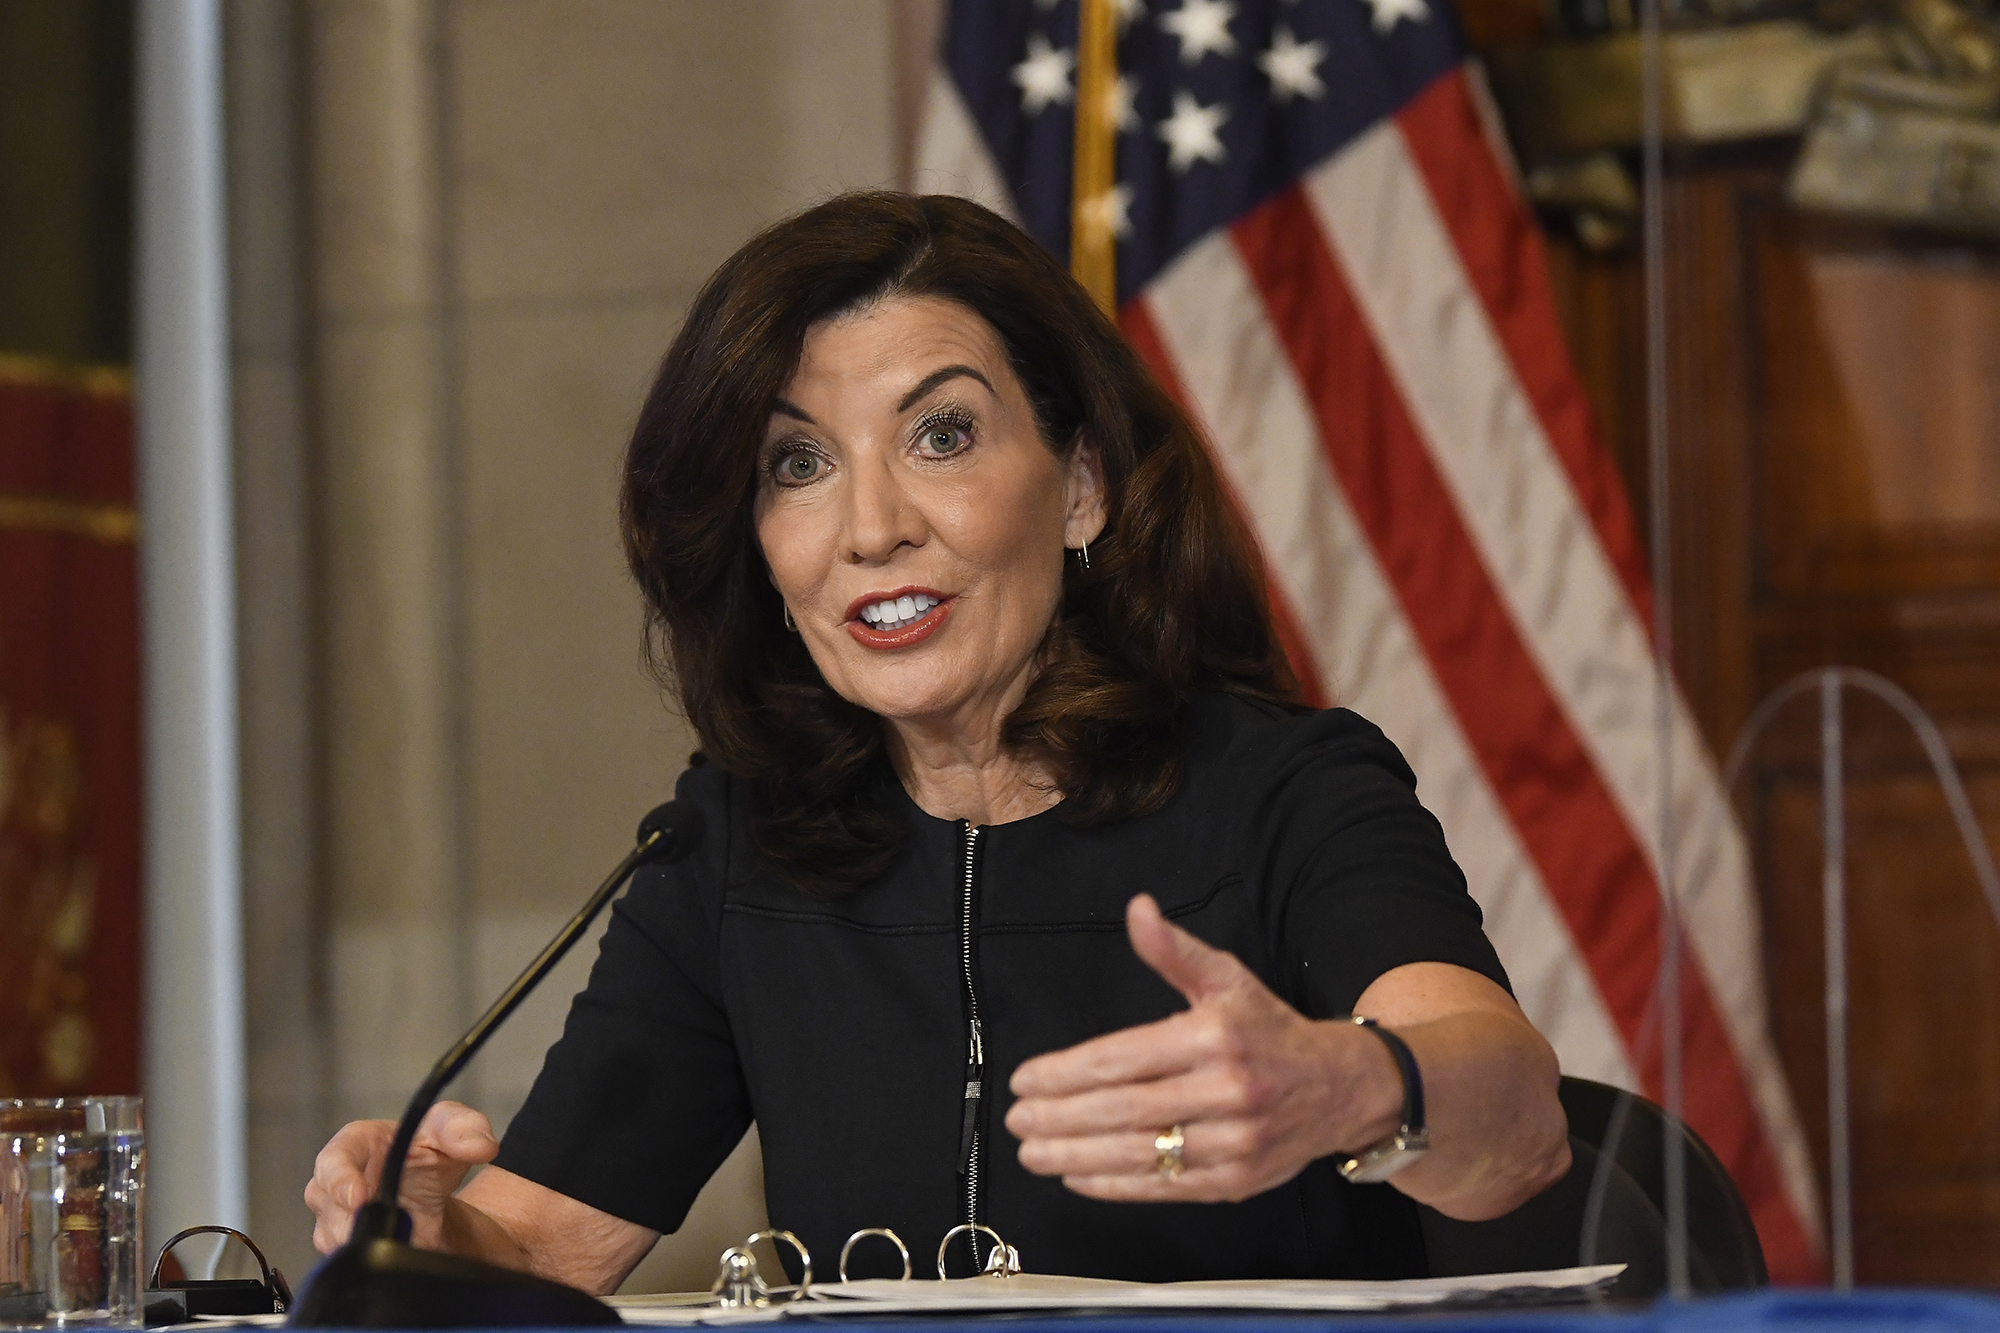 New York Gov. Kathy Hochul gives a COVID-19 briefing during a news conference.